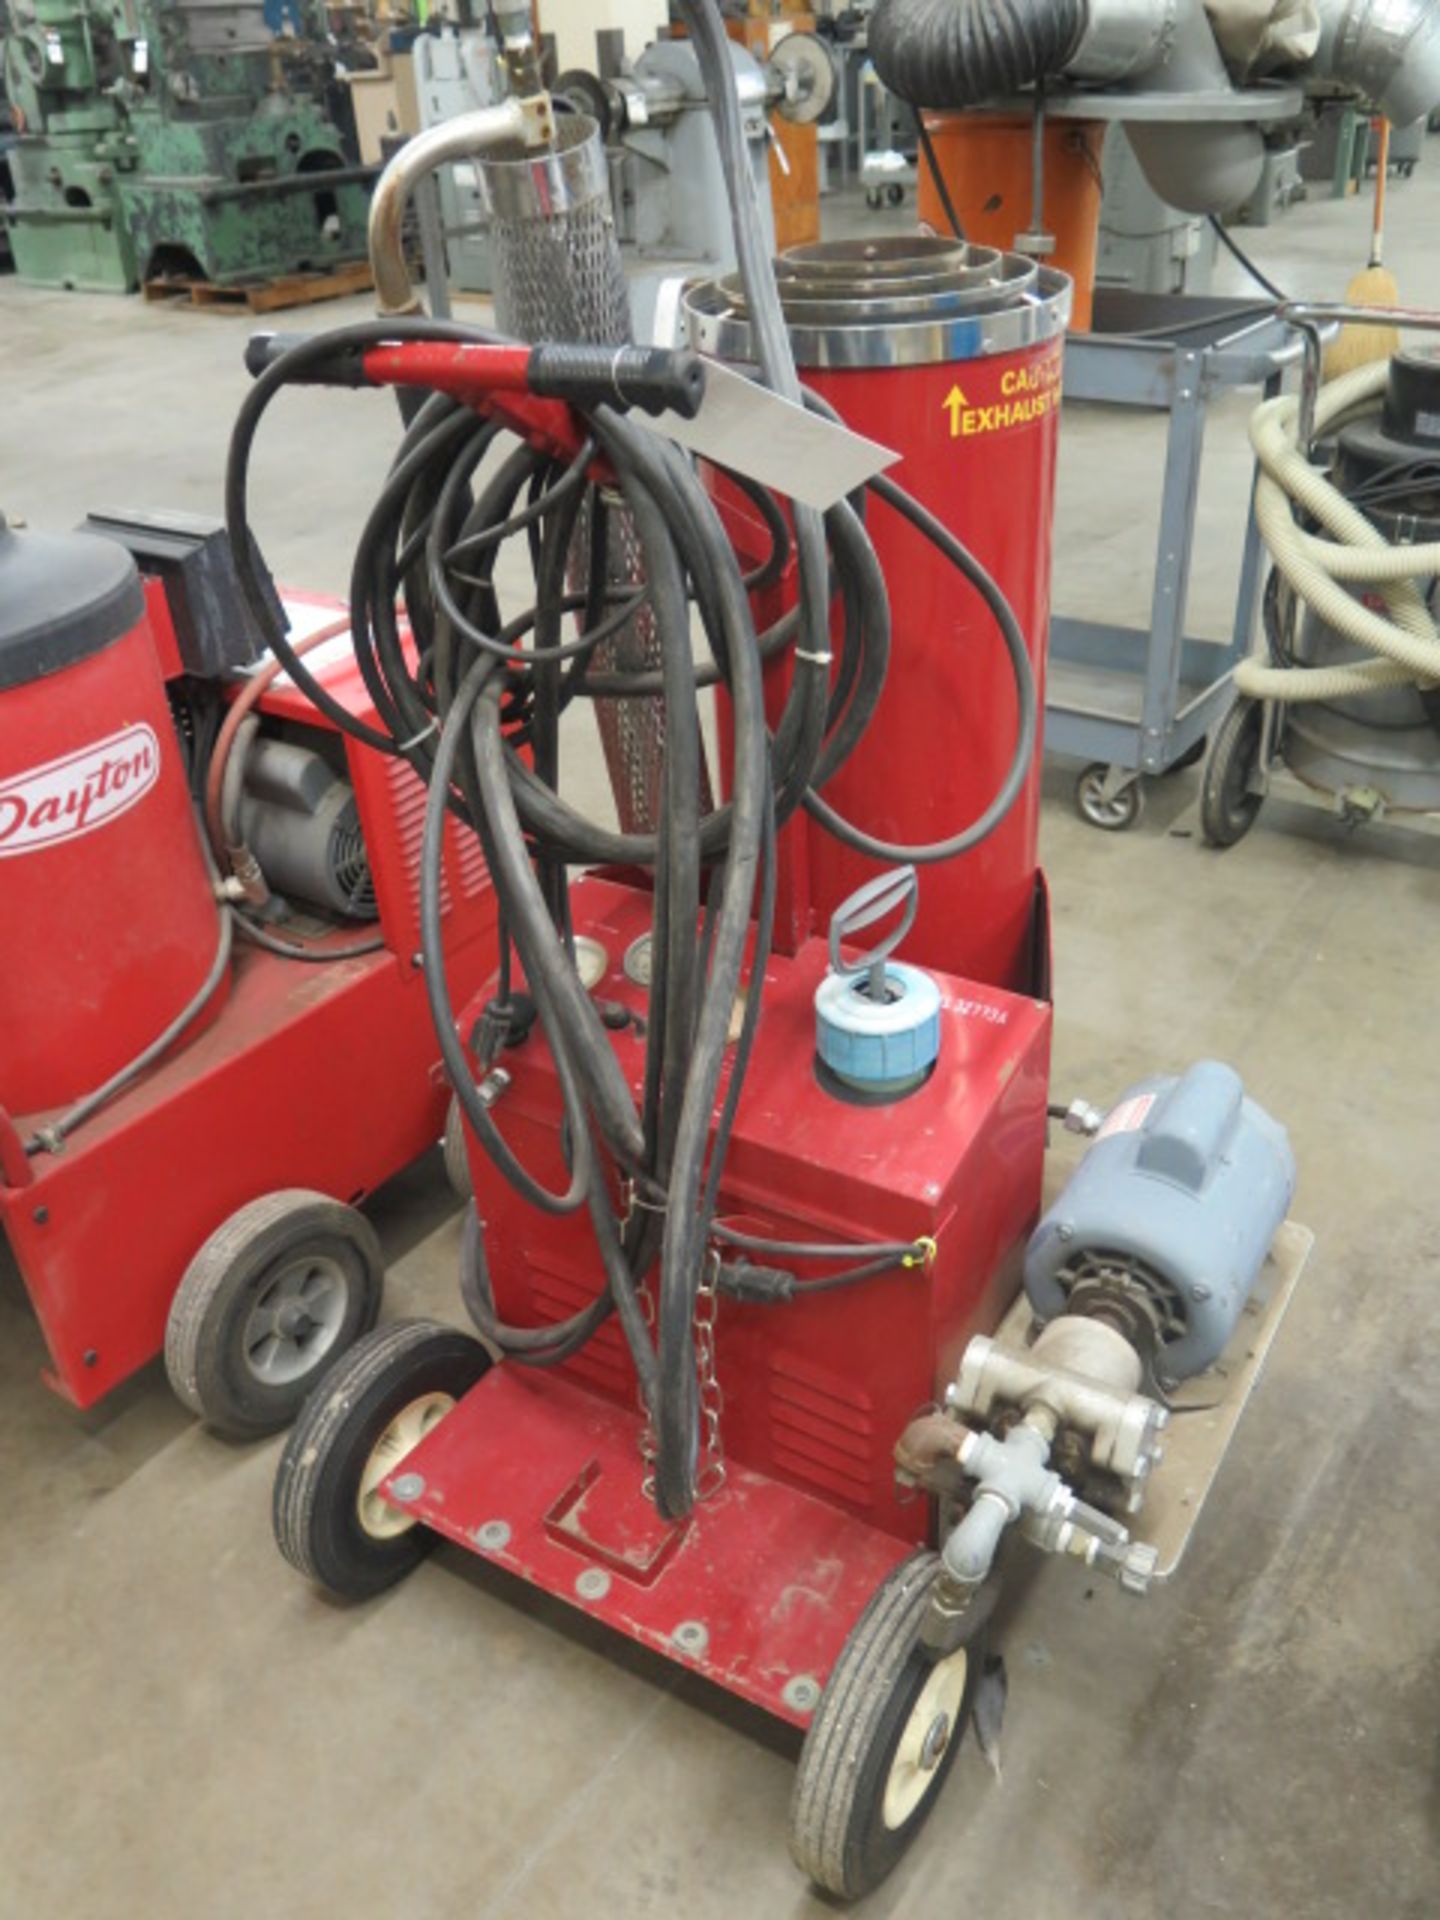 Dayton Fuel Oil Fired Heated Pressure Washer - Image 2 of 5